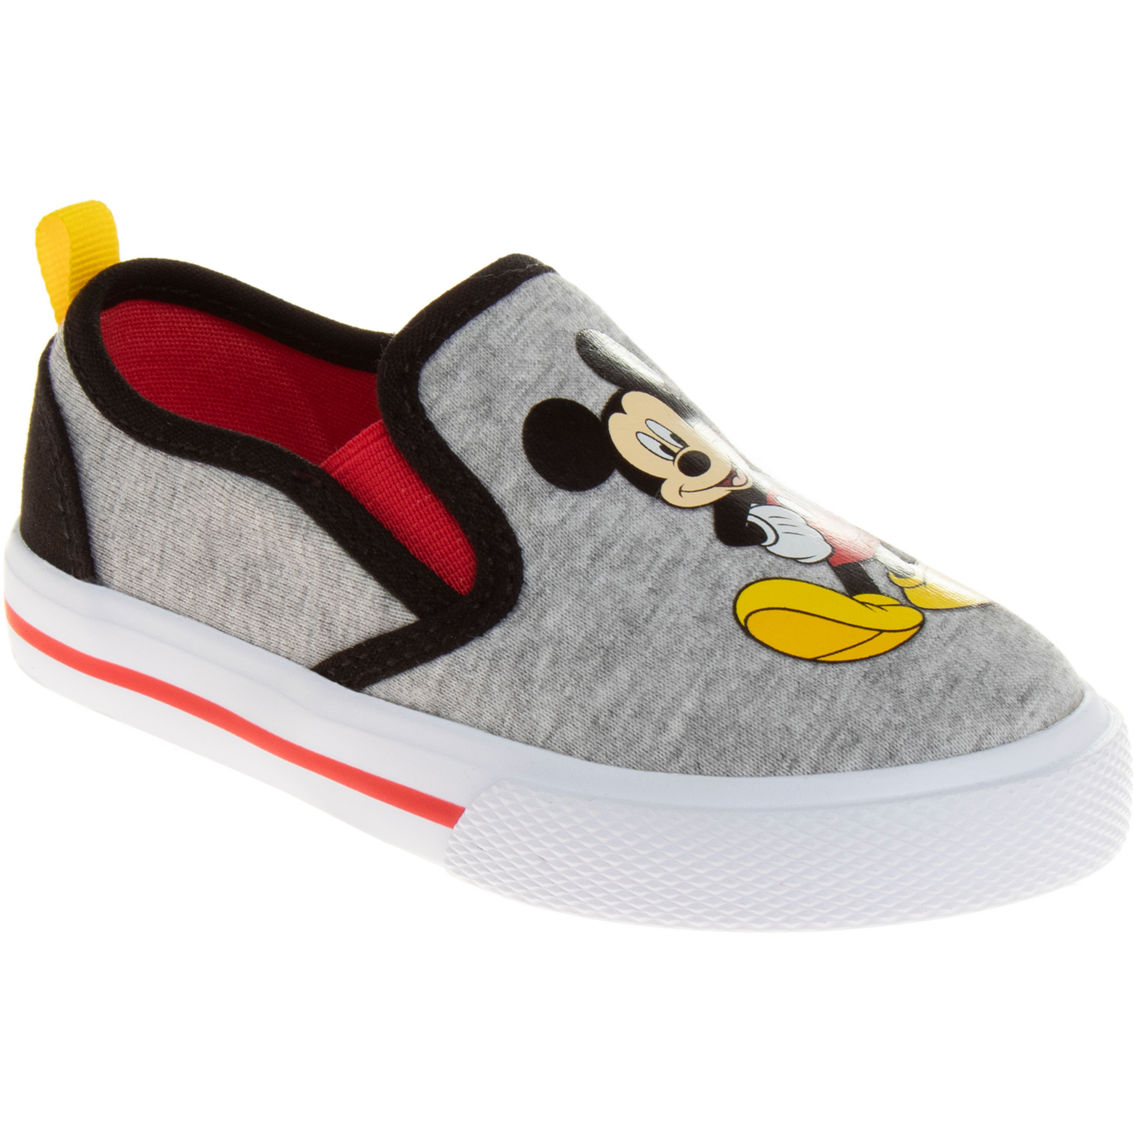 Mickey Mouse Toddler Boys Slip On Sneakers - Image 2 of 5